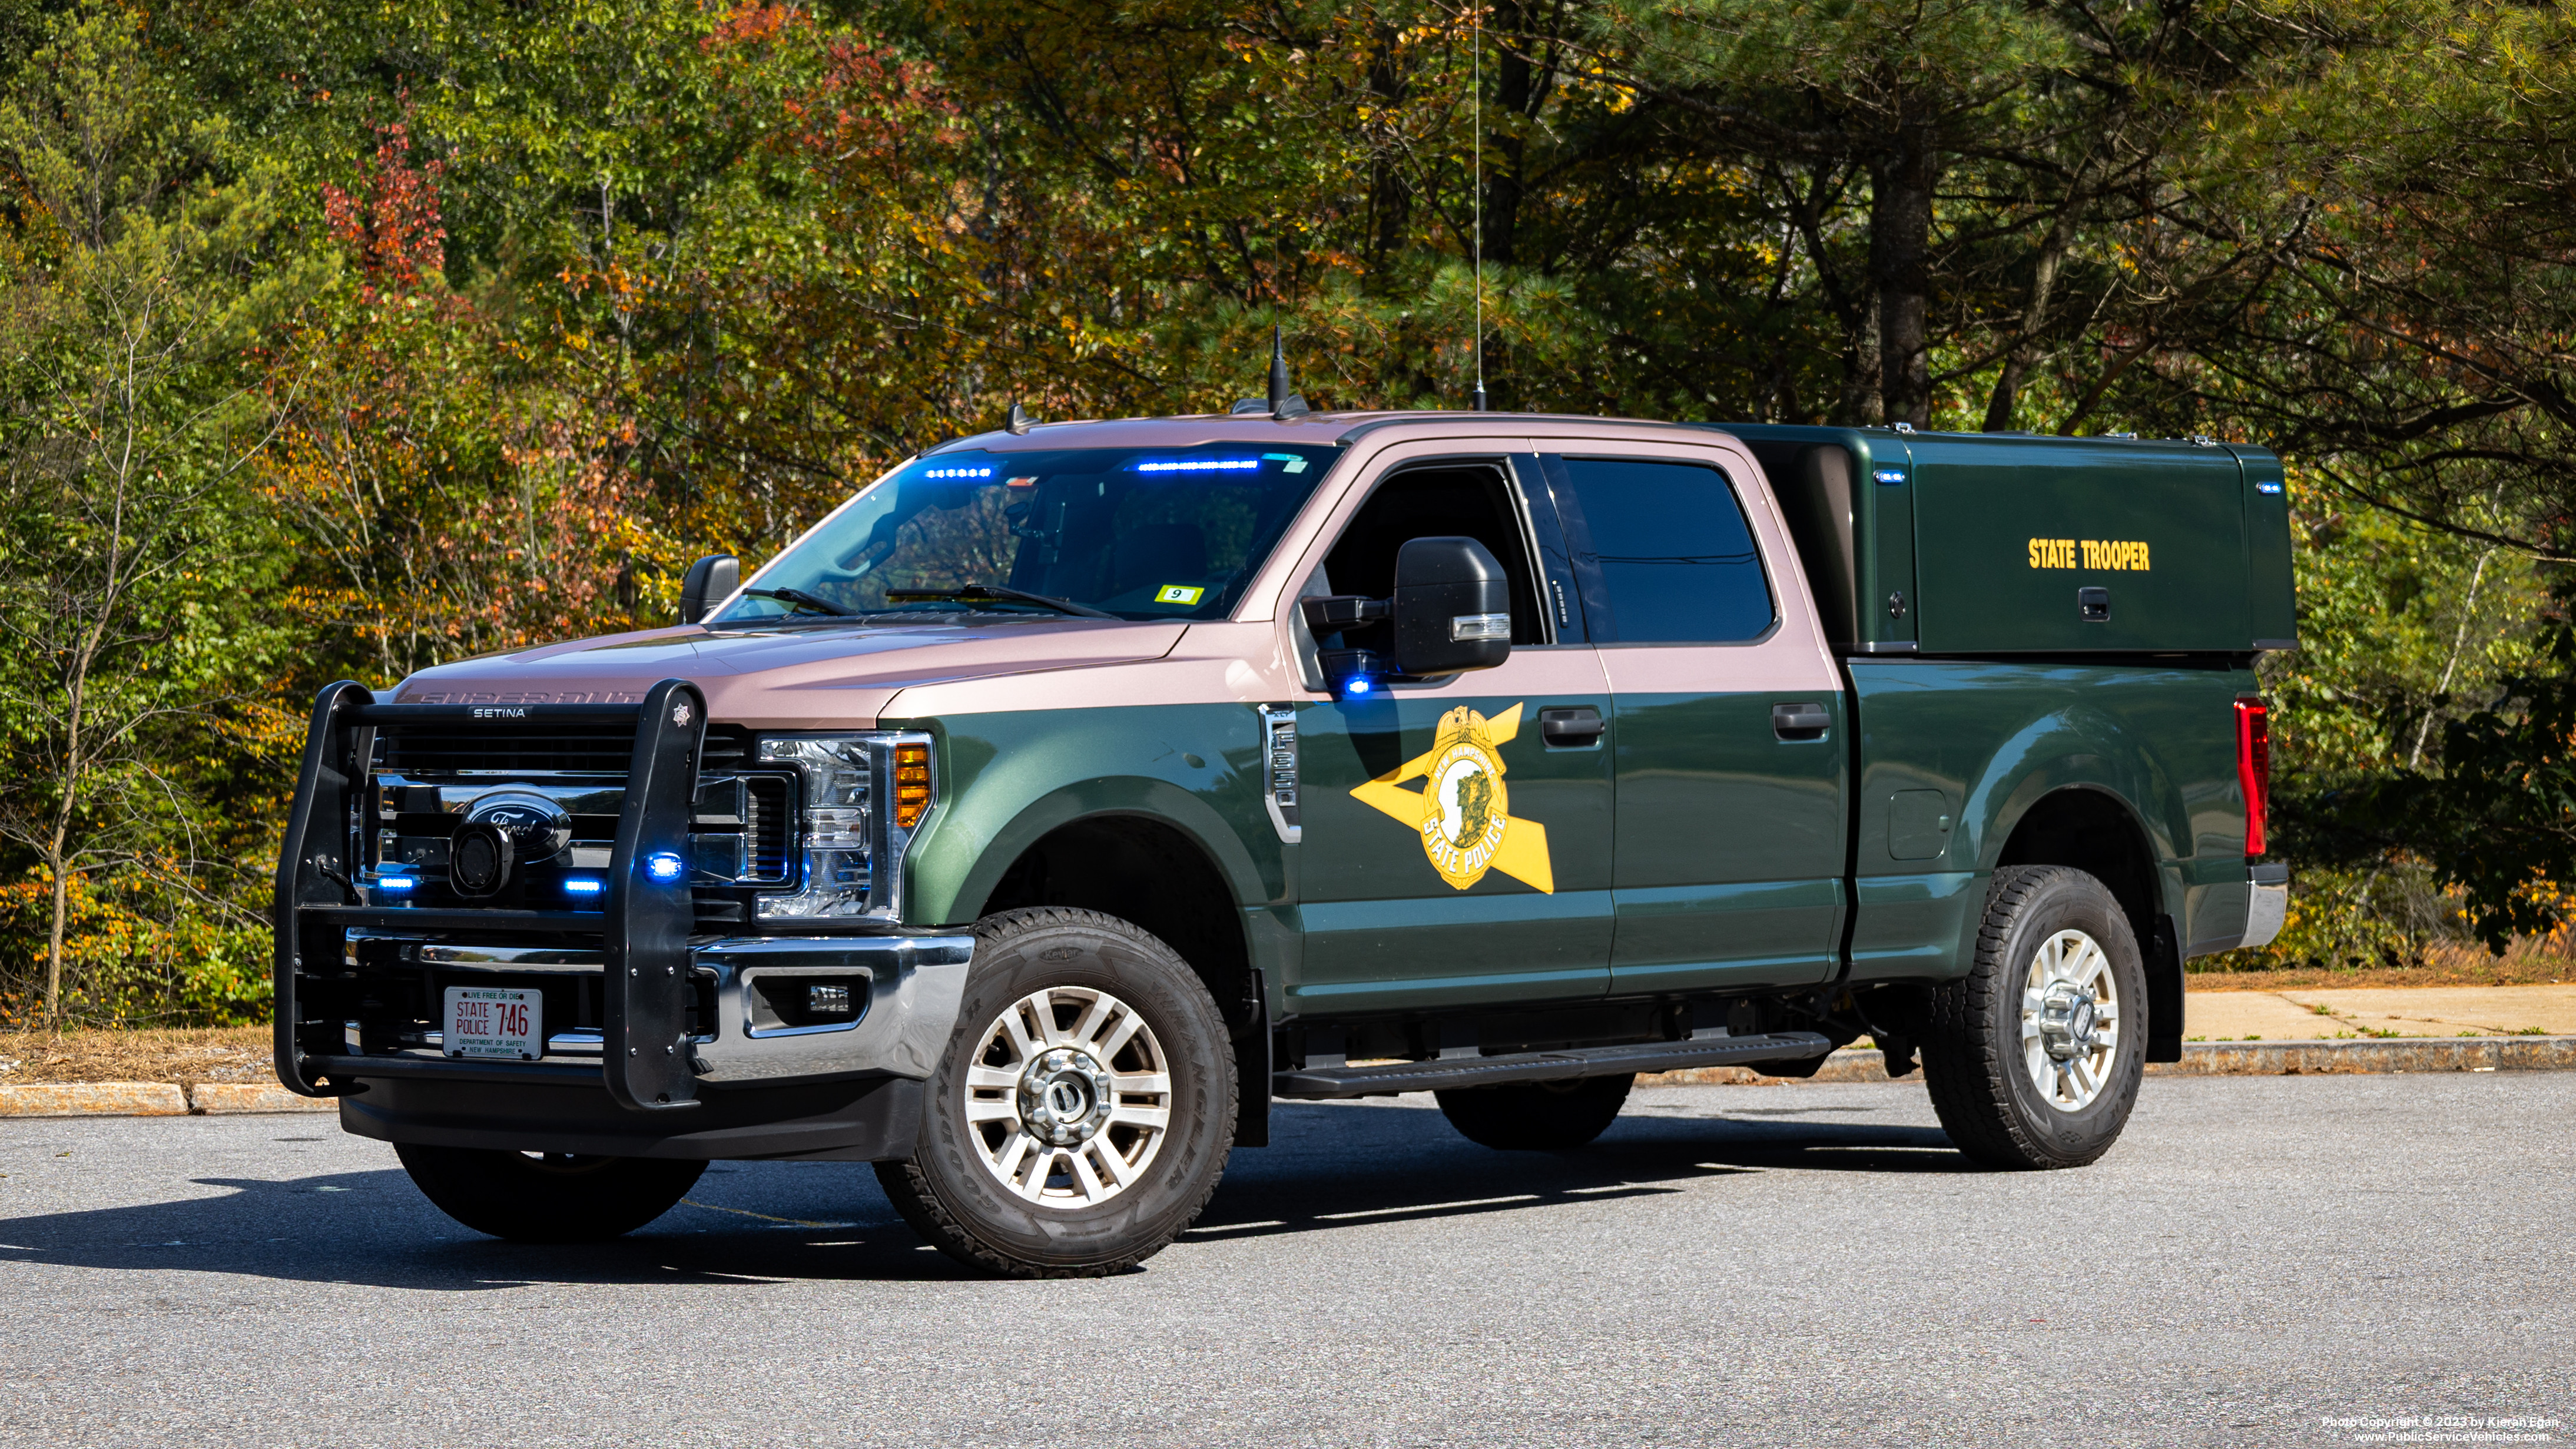 A photo  of New Hampshire State Police
            Cruiser 746, a 2017-2019 Ford F-350 XL Crew Cab             taken by Kieran Egan